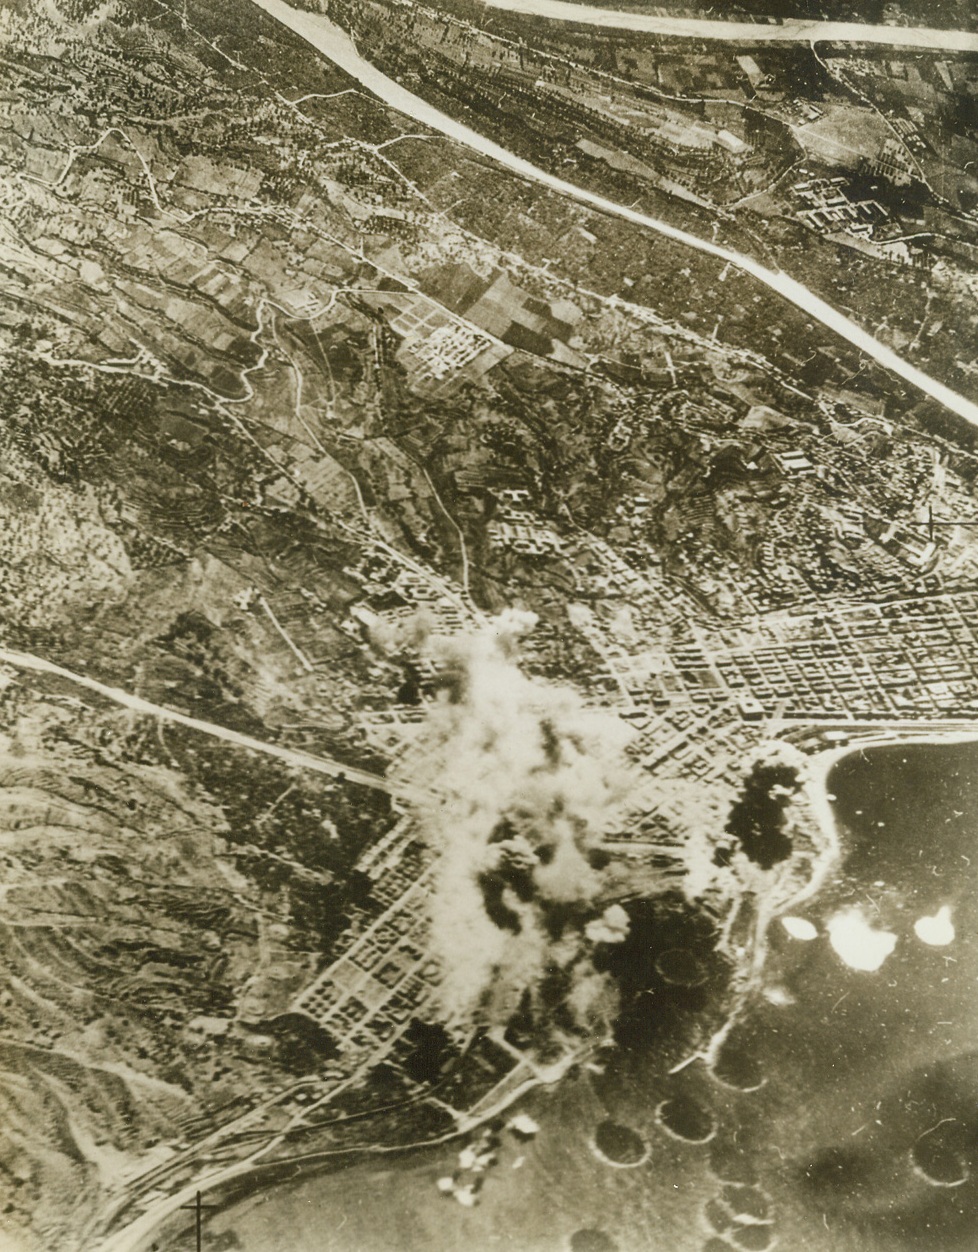 Reggio Gets Some of Pantelleria’s Medicine, 6/12/1943. REGGIO, ITALY – Now that Pantelleria has succumbed to the relentless Allied “invasion by air”, the United Nations air forces are turning full force on Mussolini’s mainland. Smoke and debris soar skyward as Reggio, a key Italian port at the tip of the boot, facing Sicily, feels the impact of Allied bombs. Both Reggio and San Giovanni are learning of the deadly accuracy of American bombardiers as they batter at the not-so-soft underbelly of Europe. Credit Line (Official U.S. Army Photo from Acme);